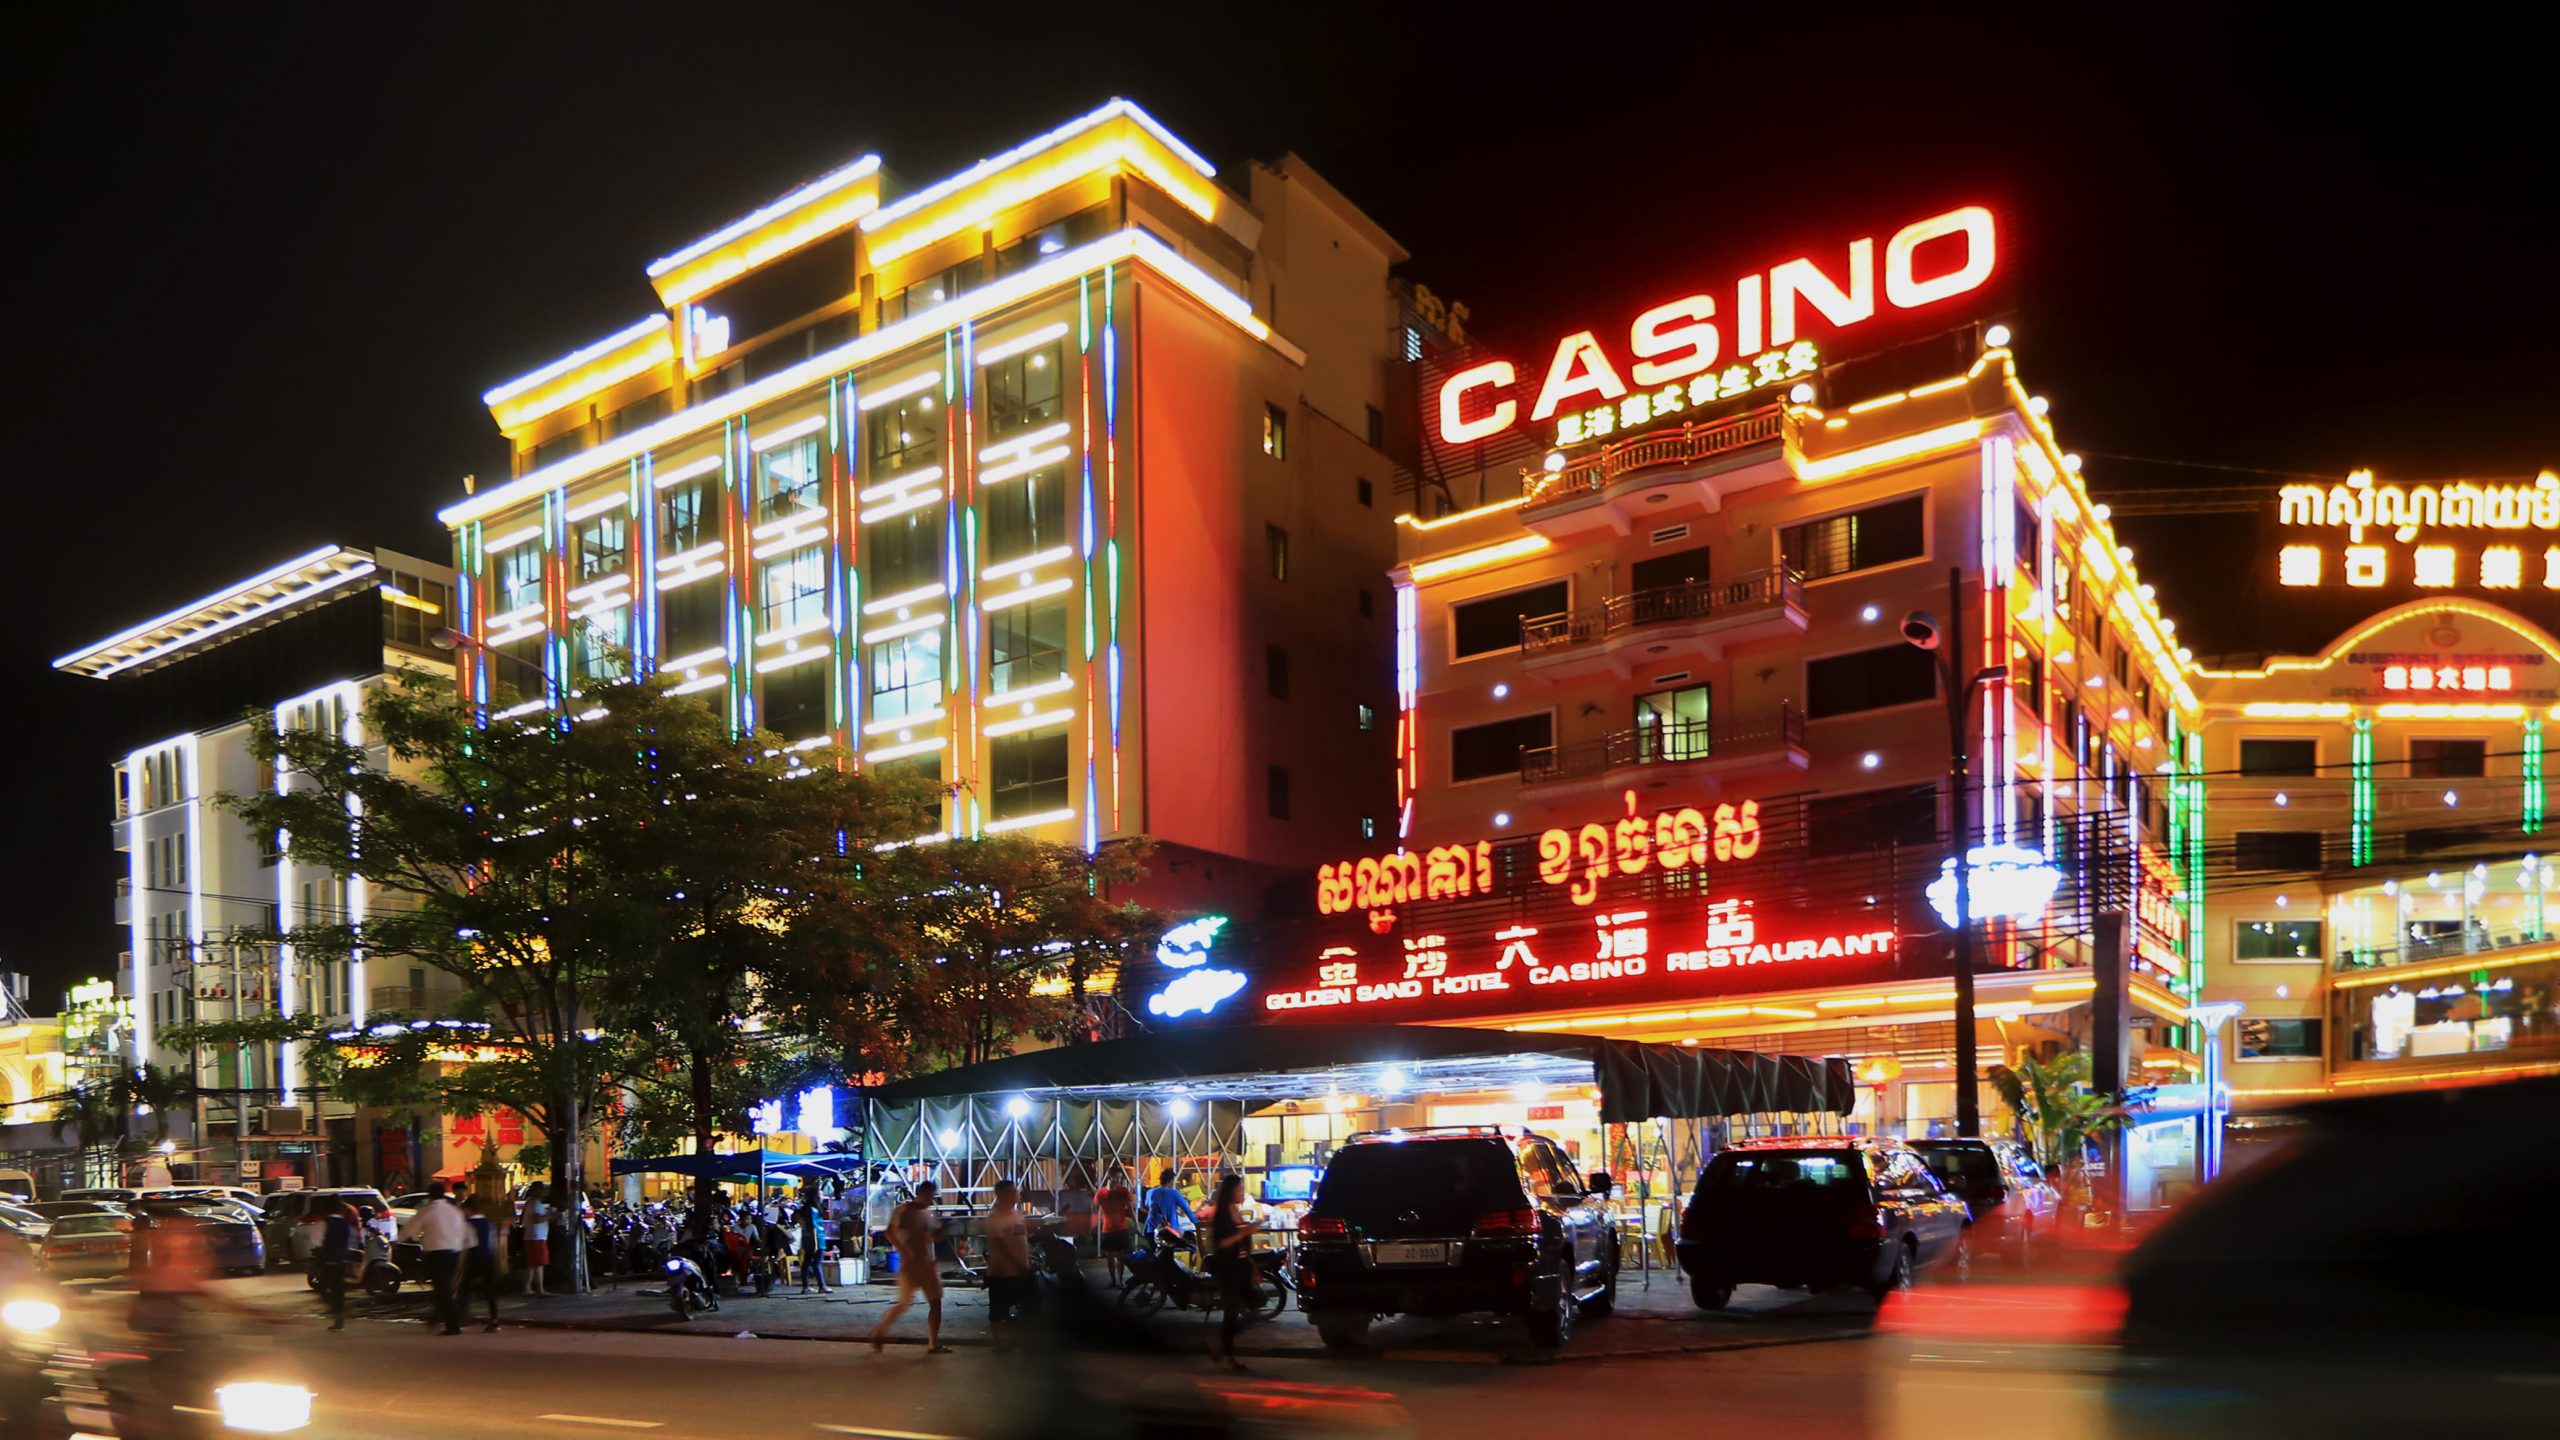 What Sets Trusted Online Casino Singapore Apart from the Competition?